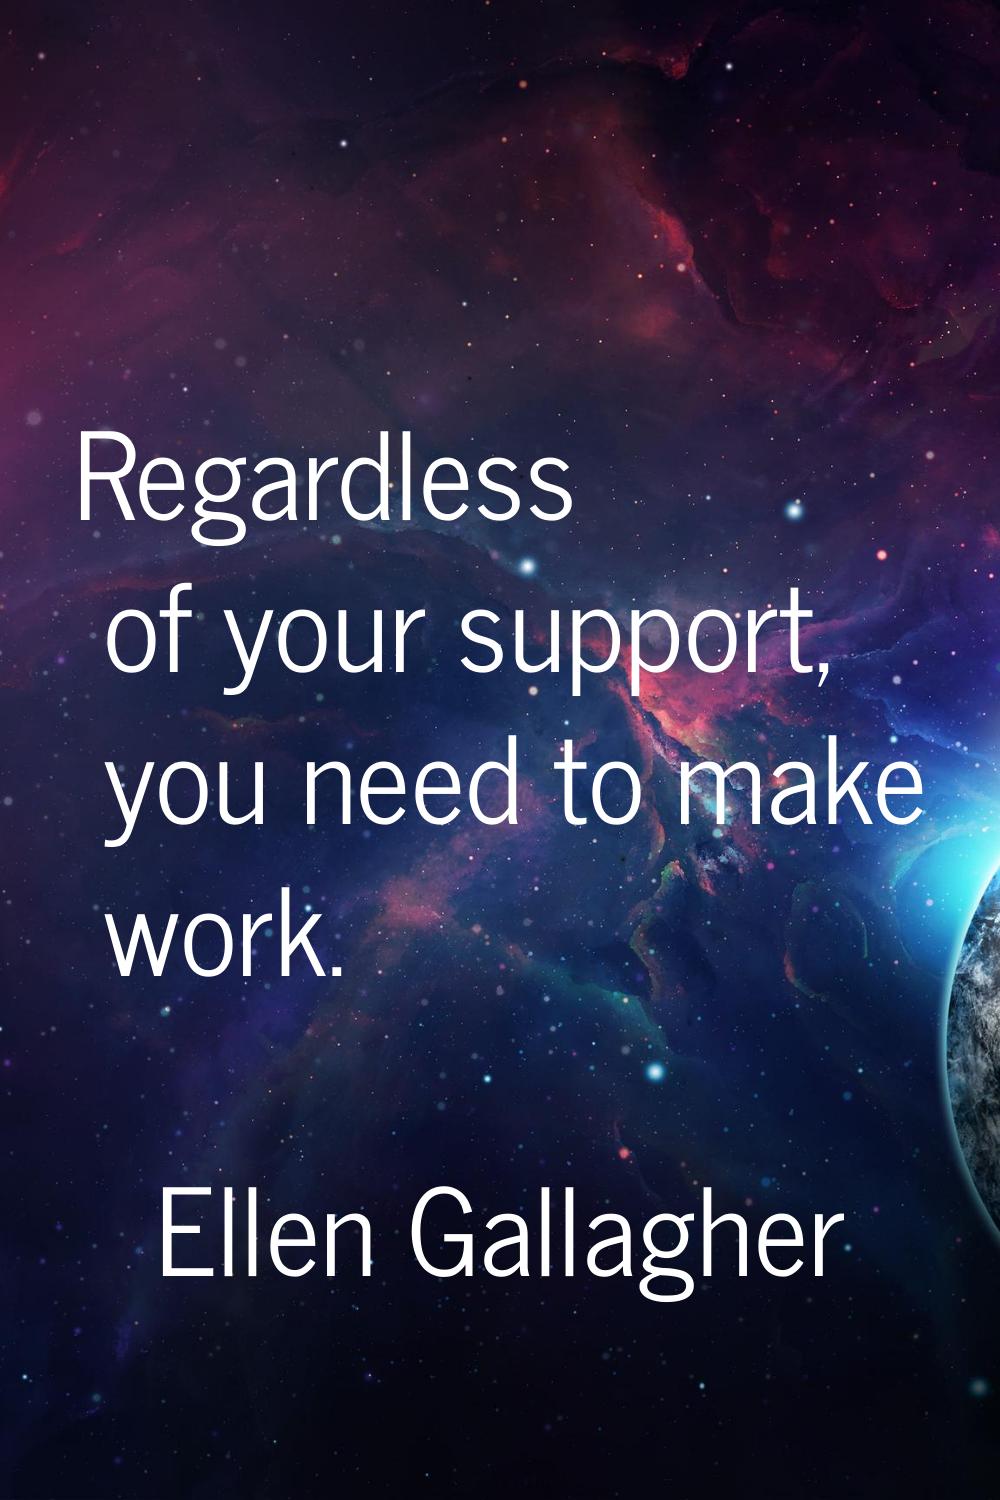 Regardless of your support, you need to make work.